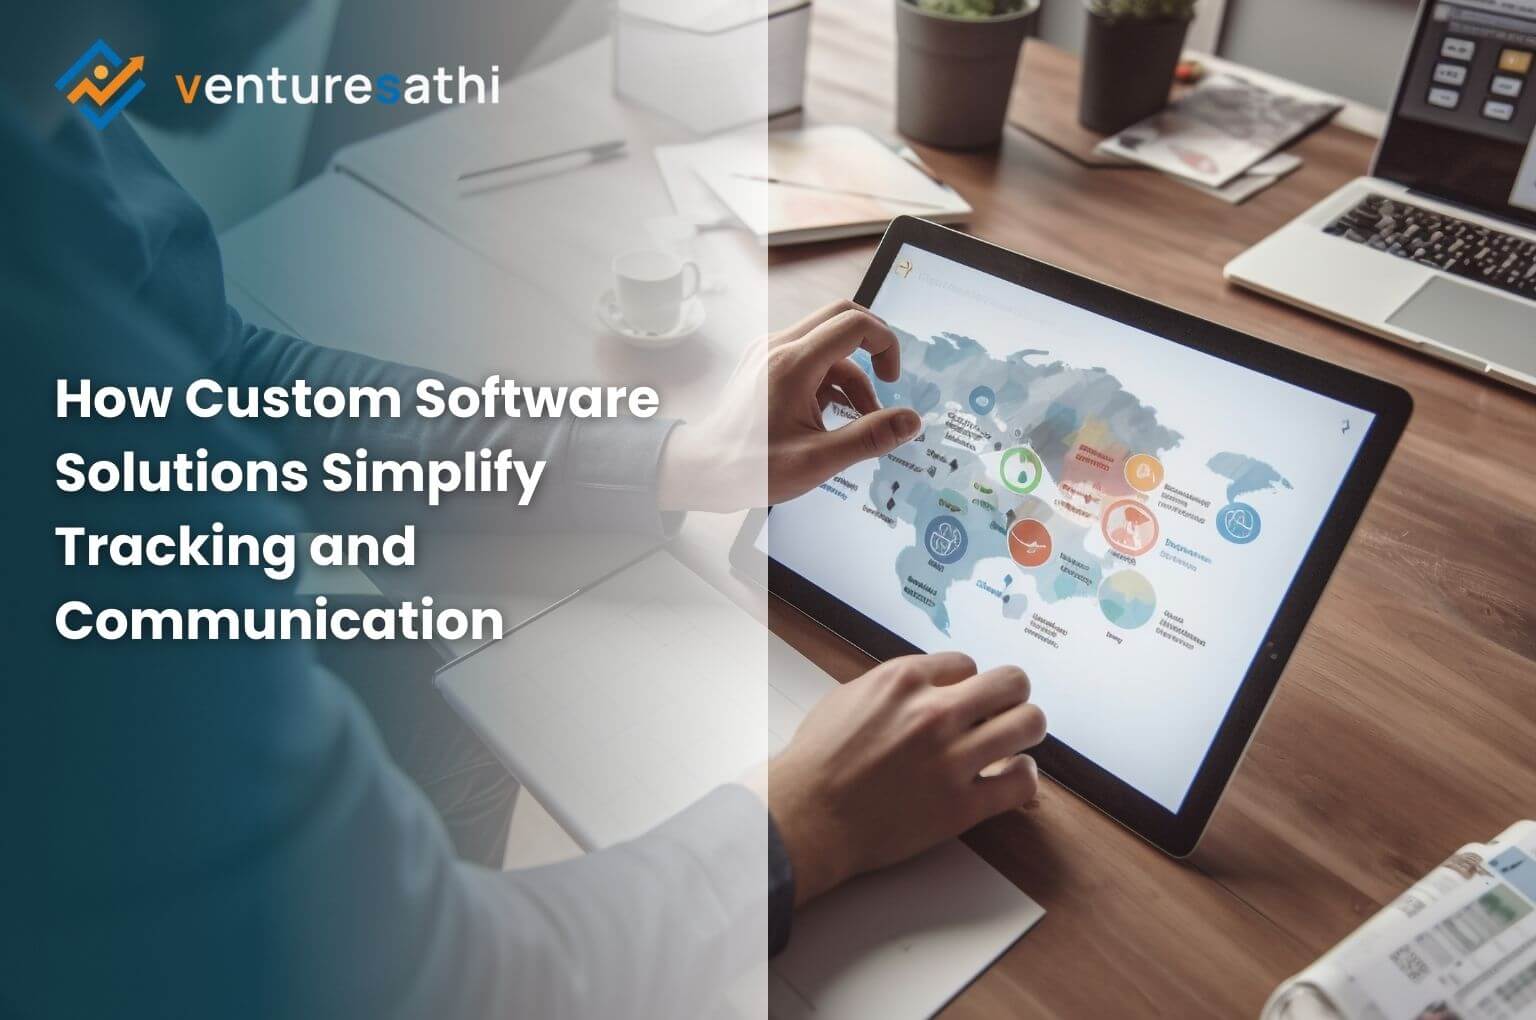 Vendor Management Made Easy: How Custom Software Solutions Simplify Tracking and Communication